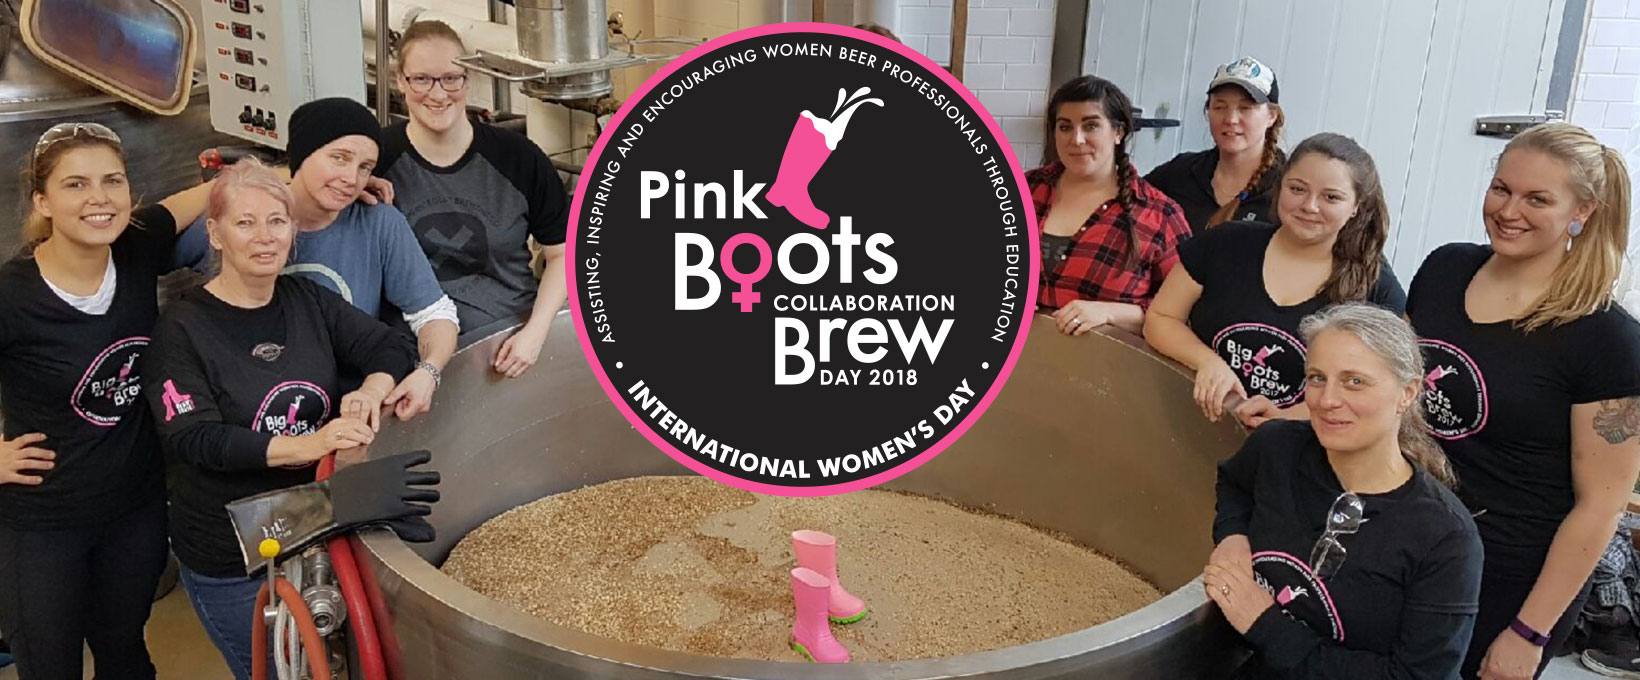 Women All Over the World Are Coming Together This Week to Brew Beer